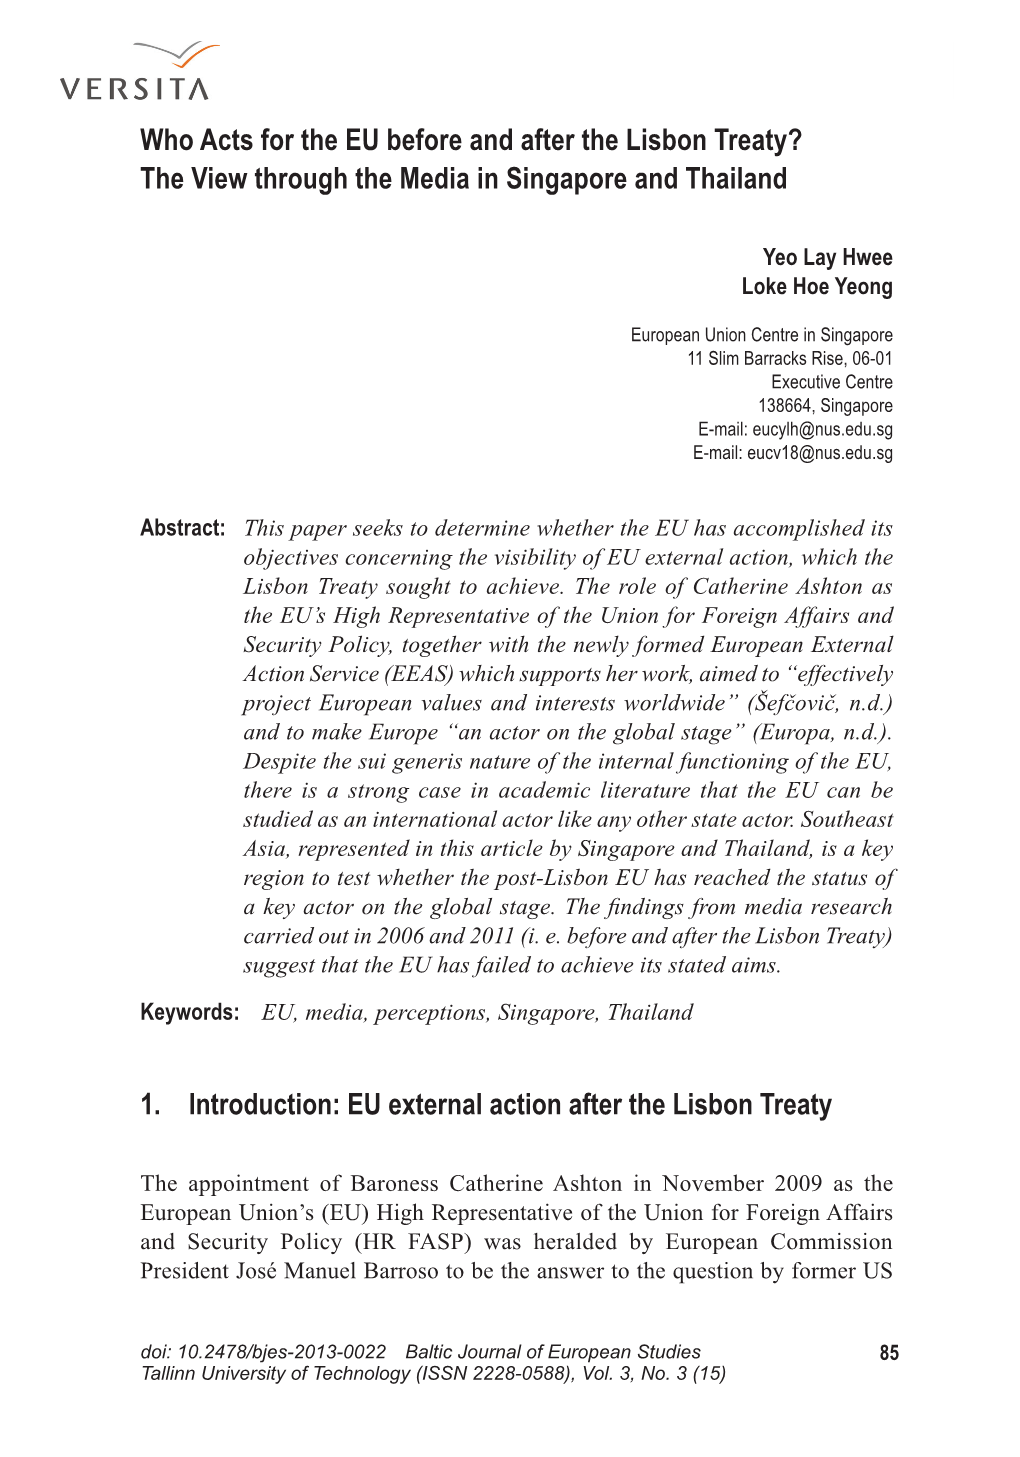 Who Acts for the EU Before and After the Lisbon Treaty? the View Through the Media in Singapore and Thailand